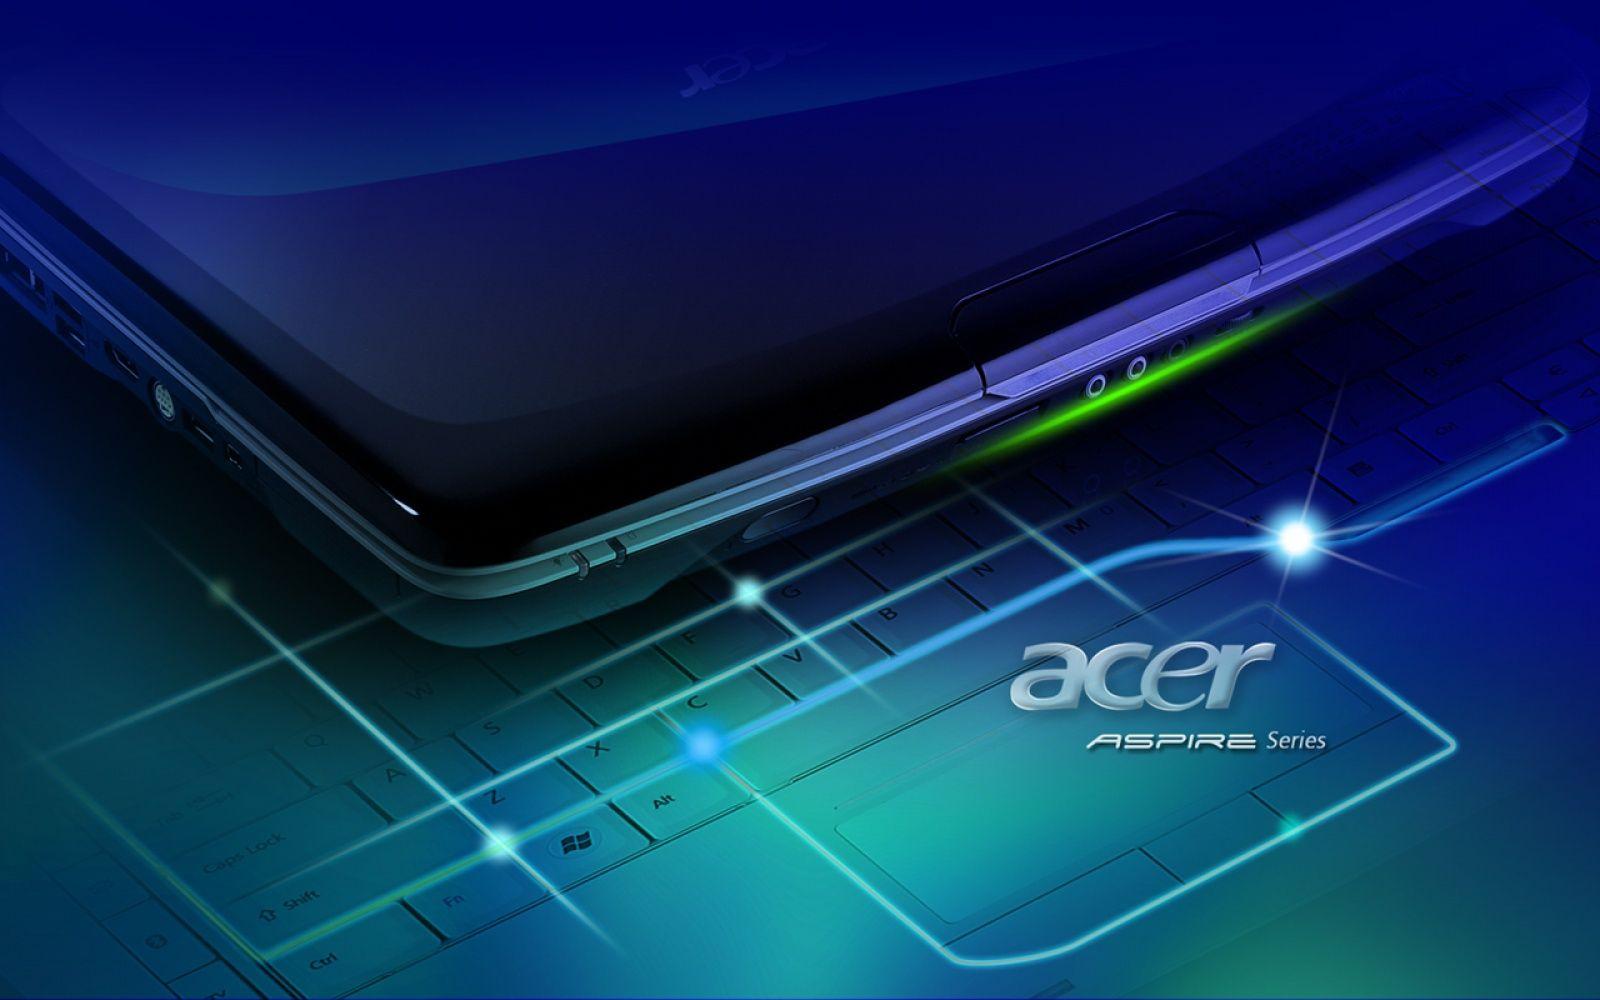 D Acer Wallpapers for PC